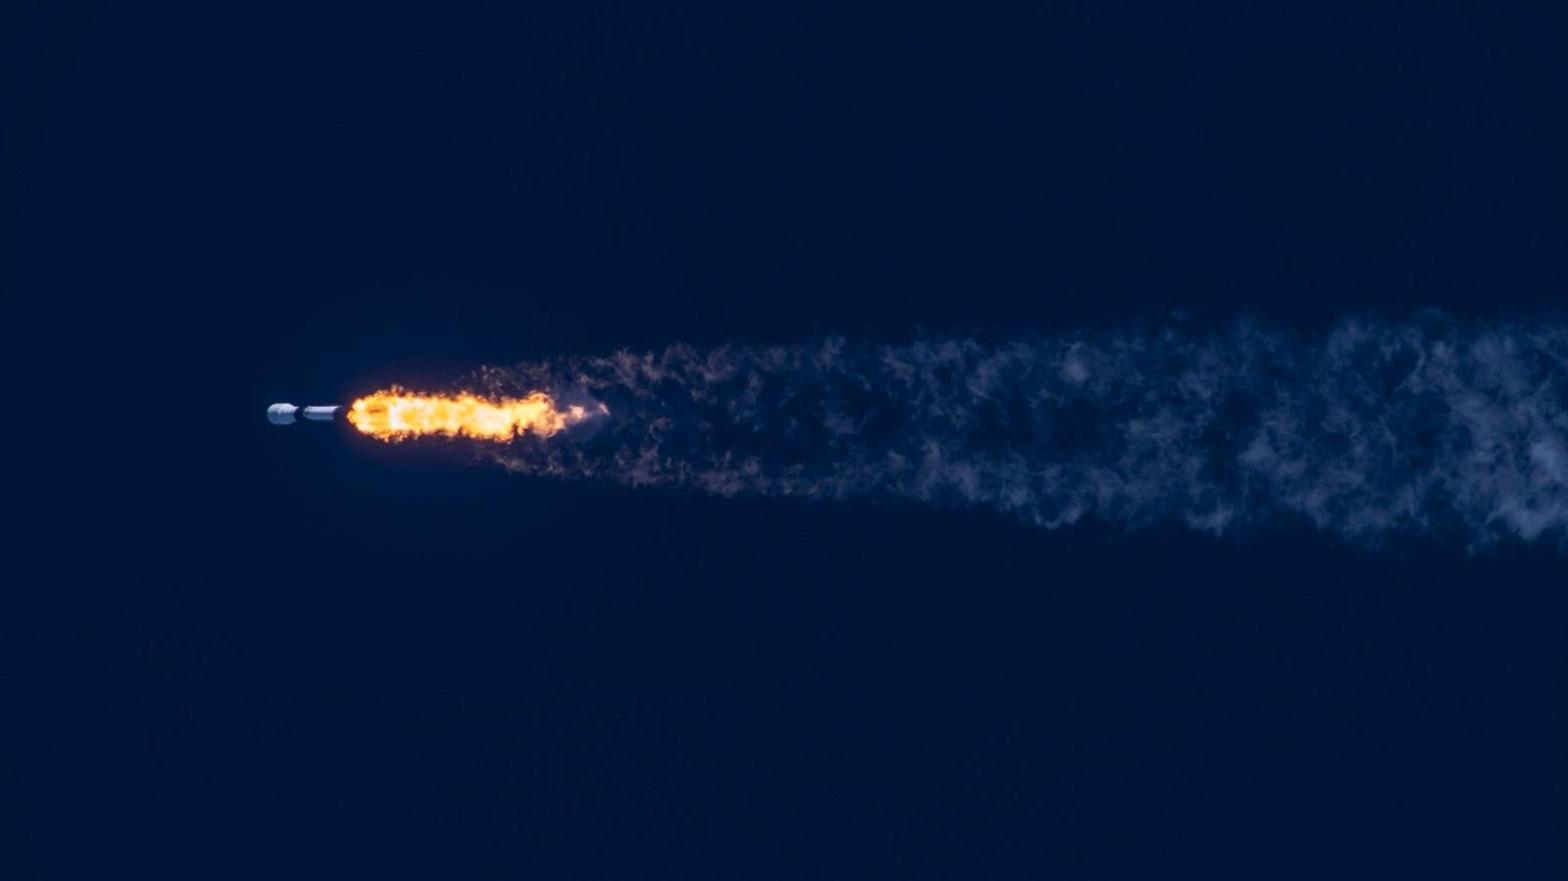 SpaceX's Falcon 9 rocket delivering the Korea Pathfinder Lunar Orbiter. (Photo: SpaceX)